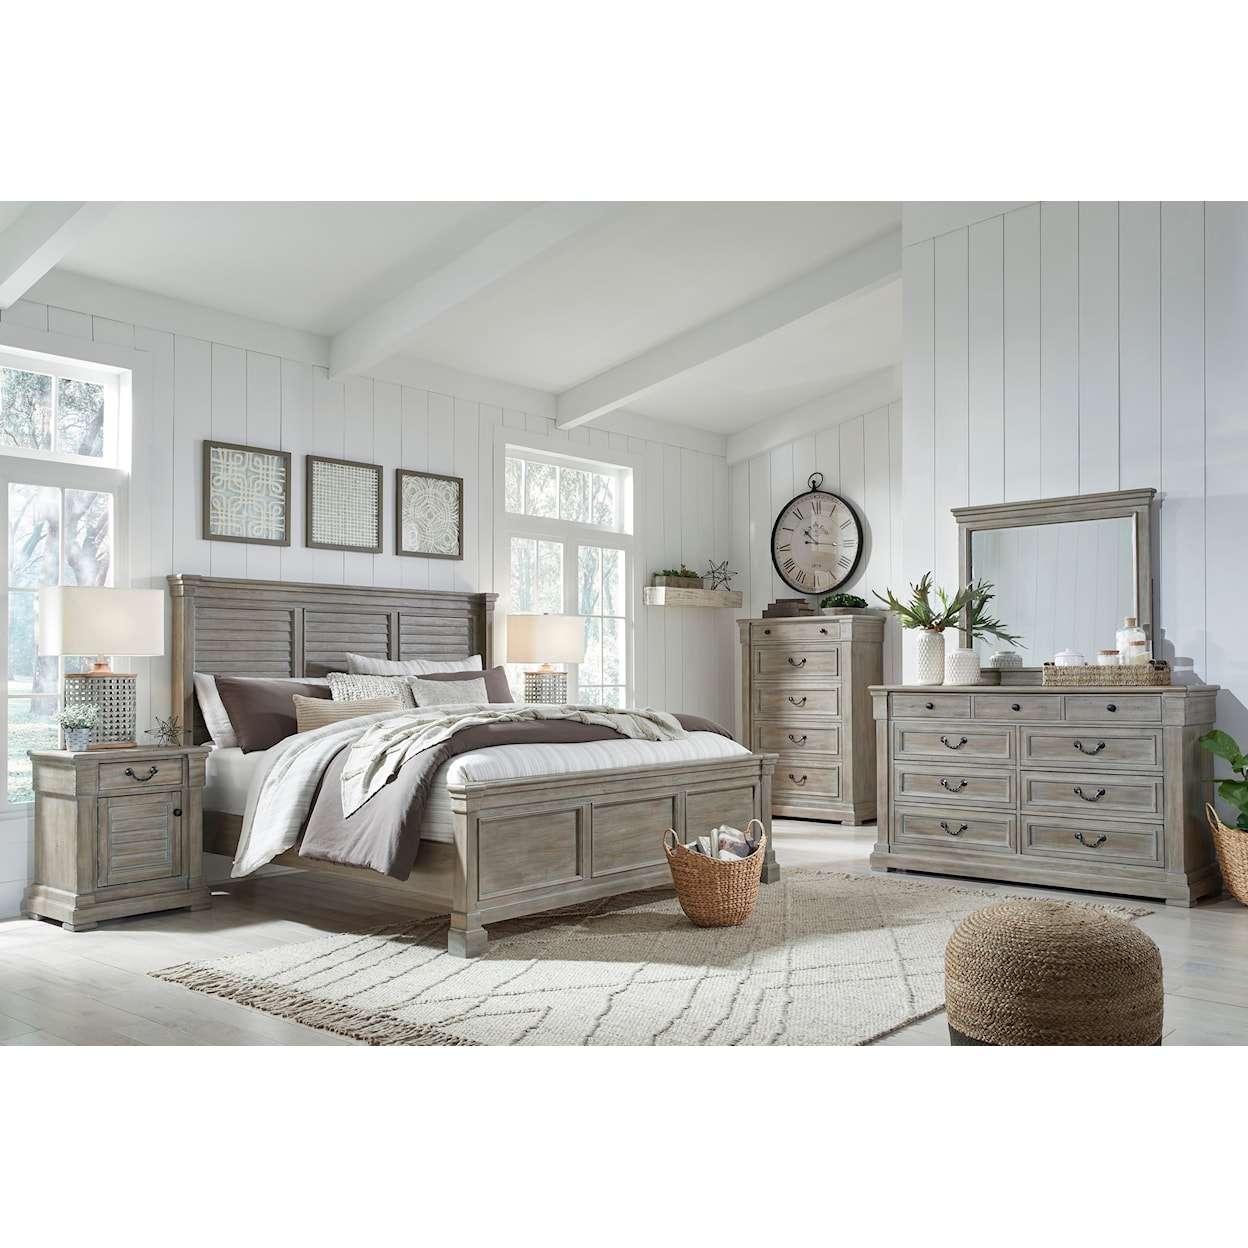 Signature Design by Ashley Moreshire King Bedroom Set